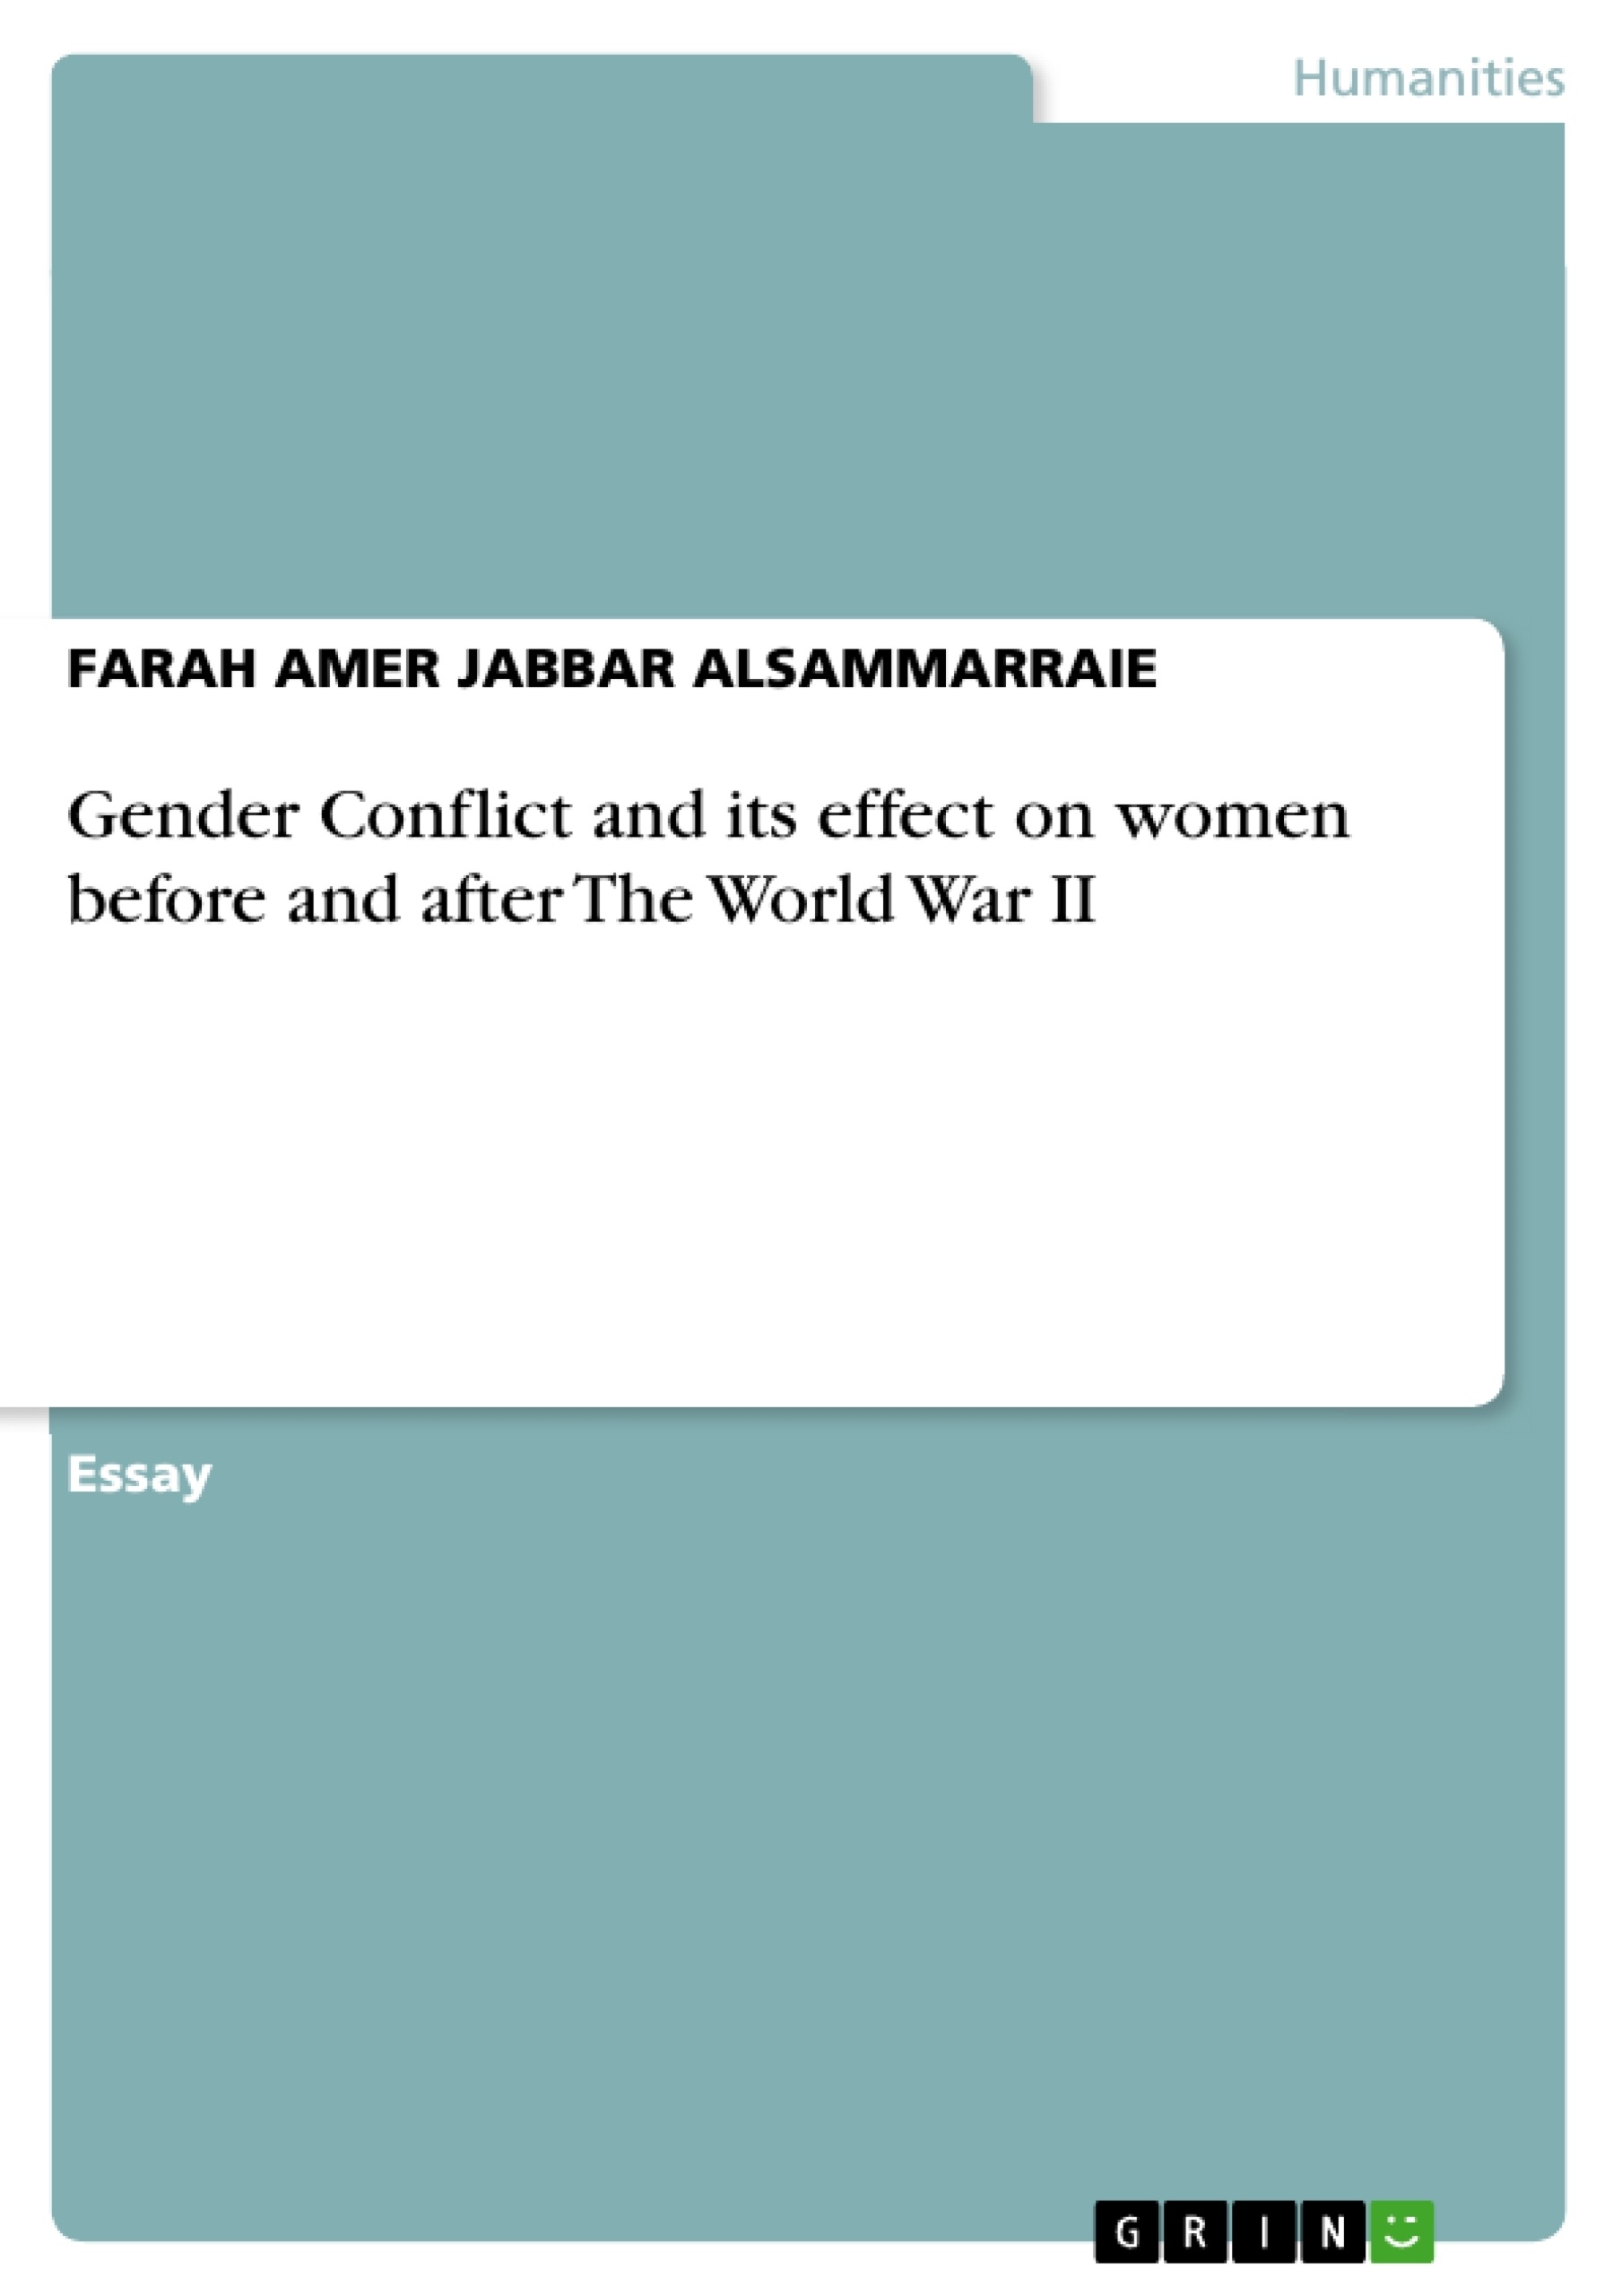 Titel: Gender Conflict and its effect on women before and after The World War II